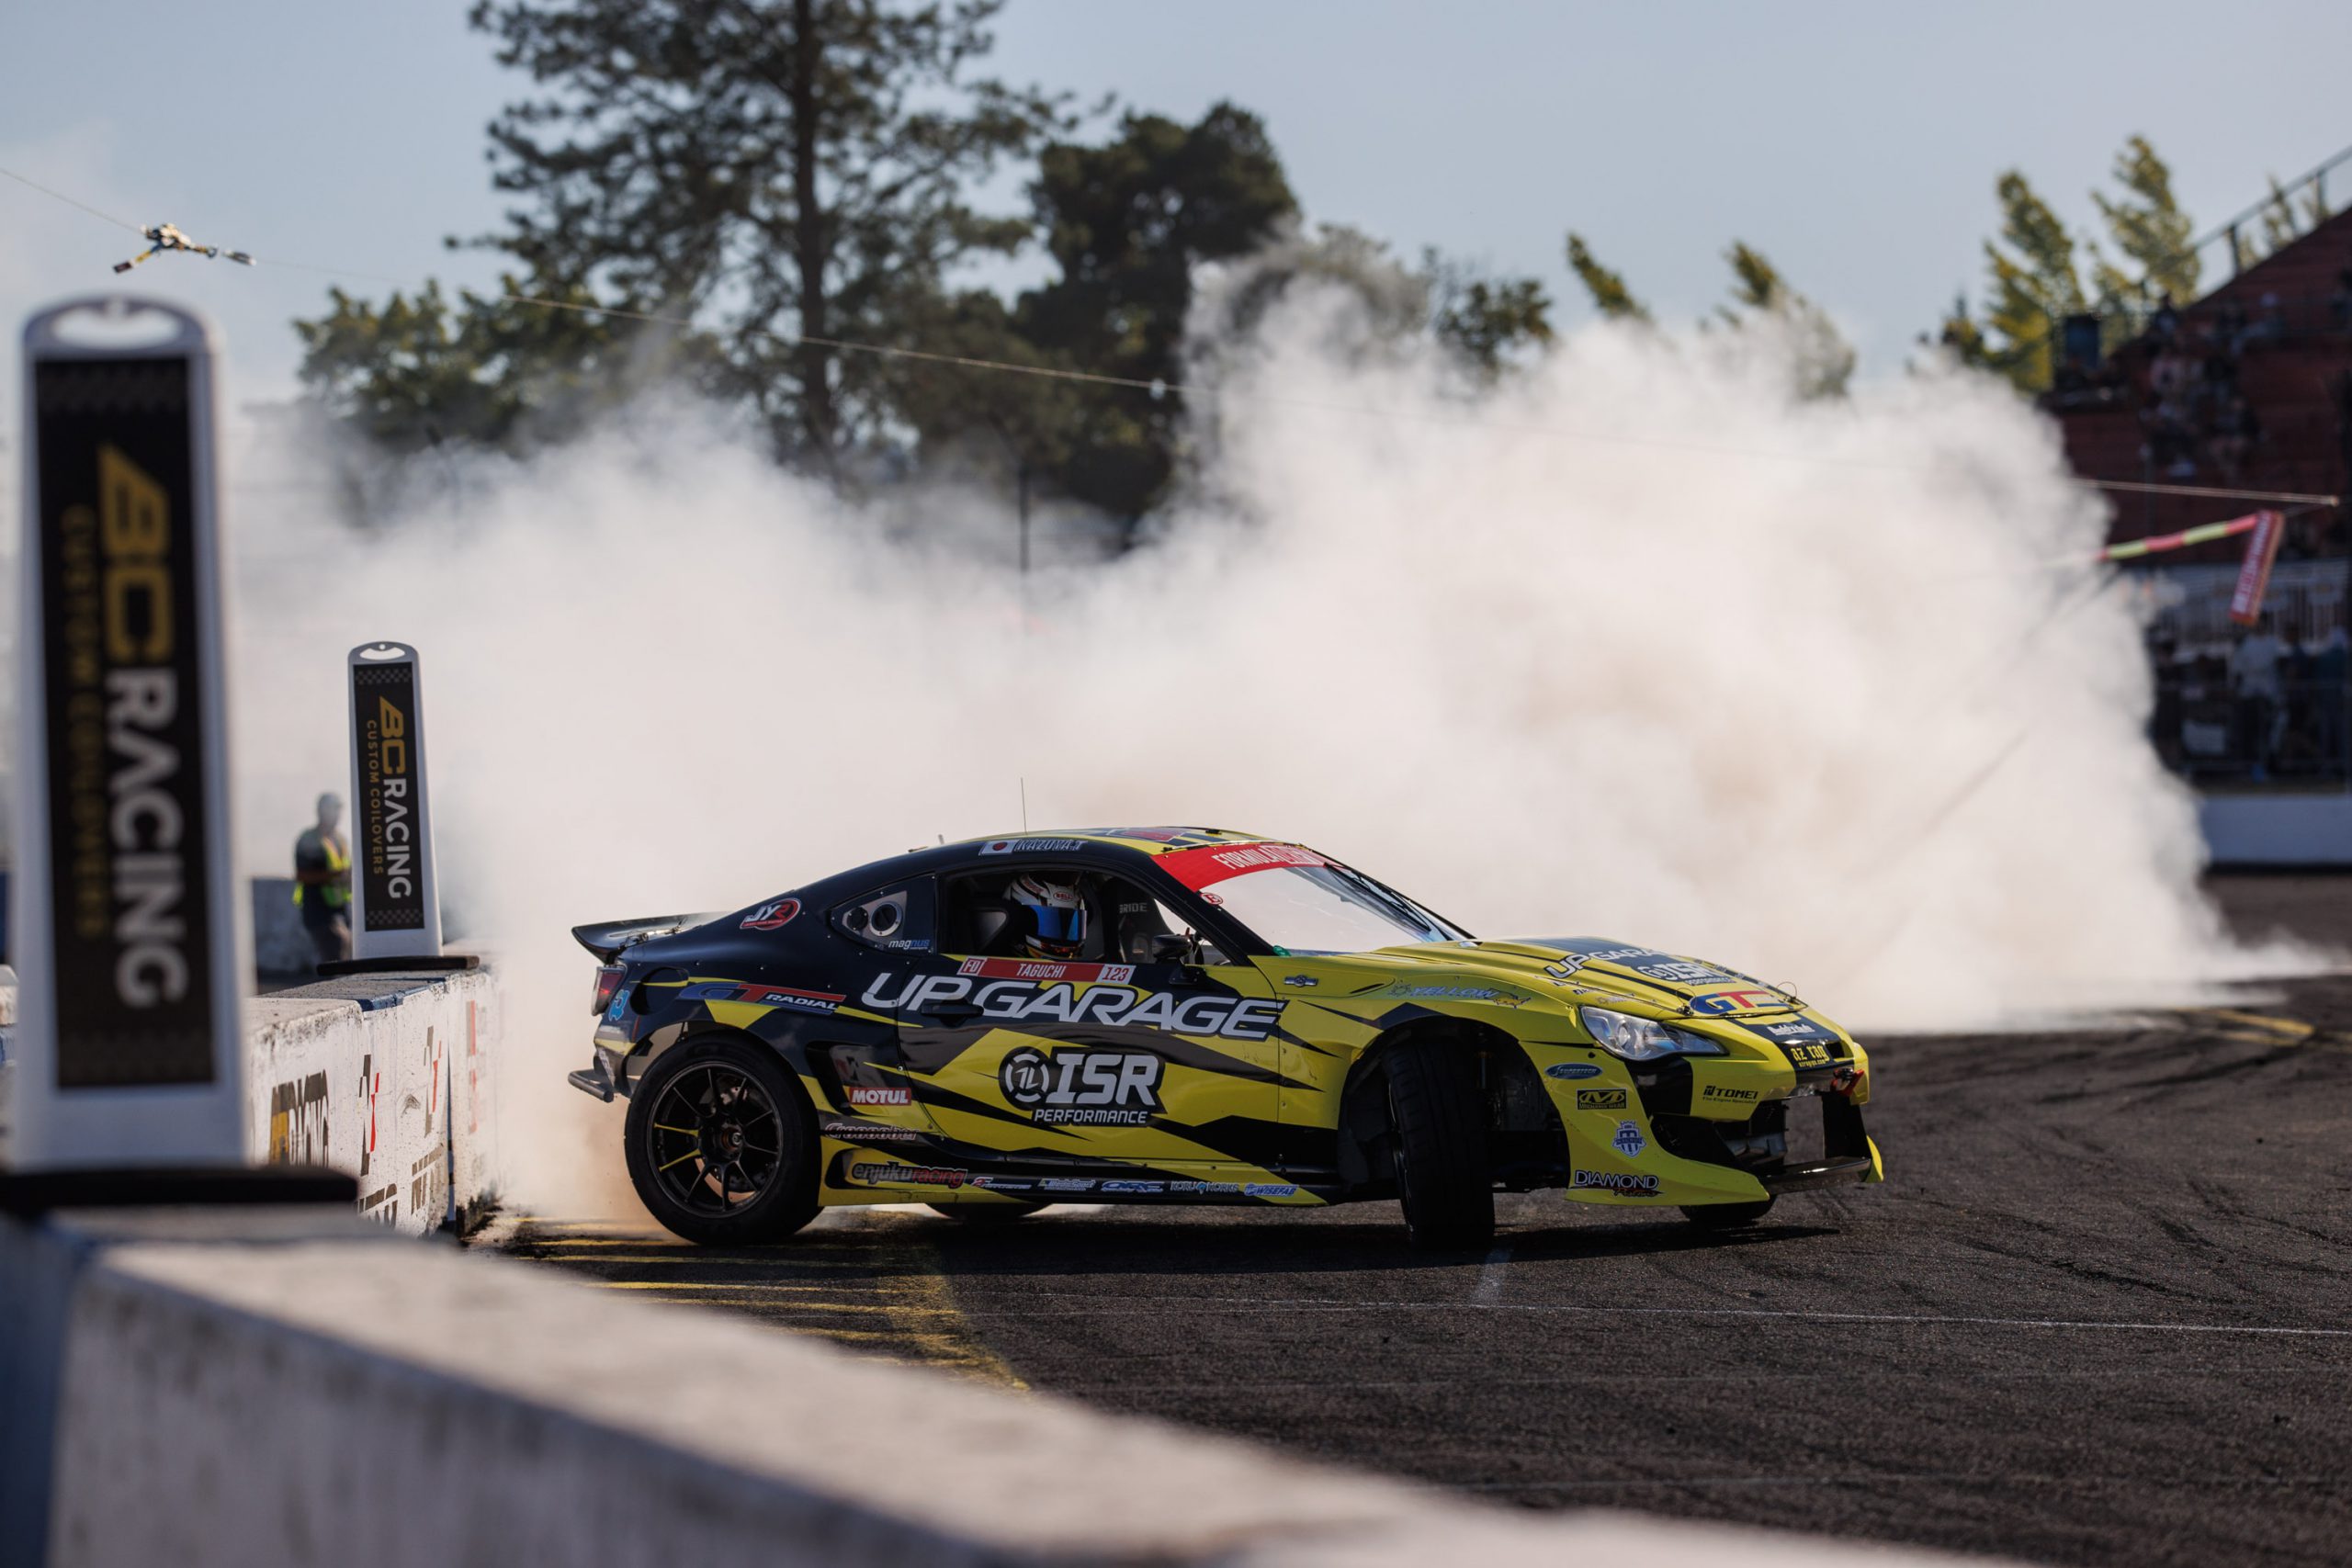 QUALIFYING RESULTS FROM ROUND 6 OF 2022 FORMULA DRIFT PRO CHAMPIONSHIP